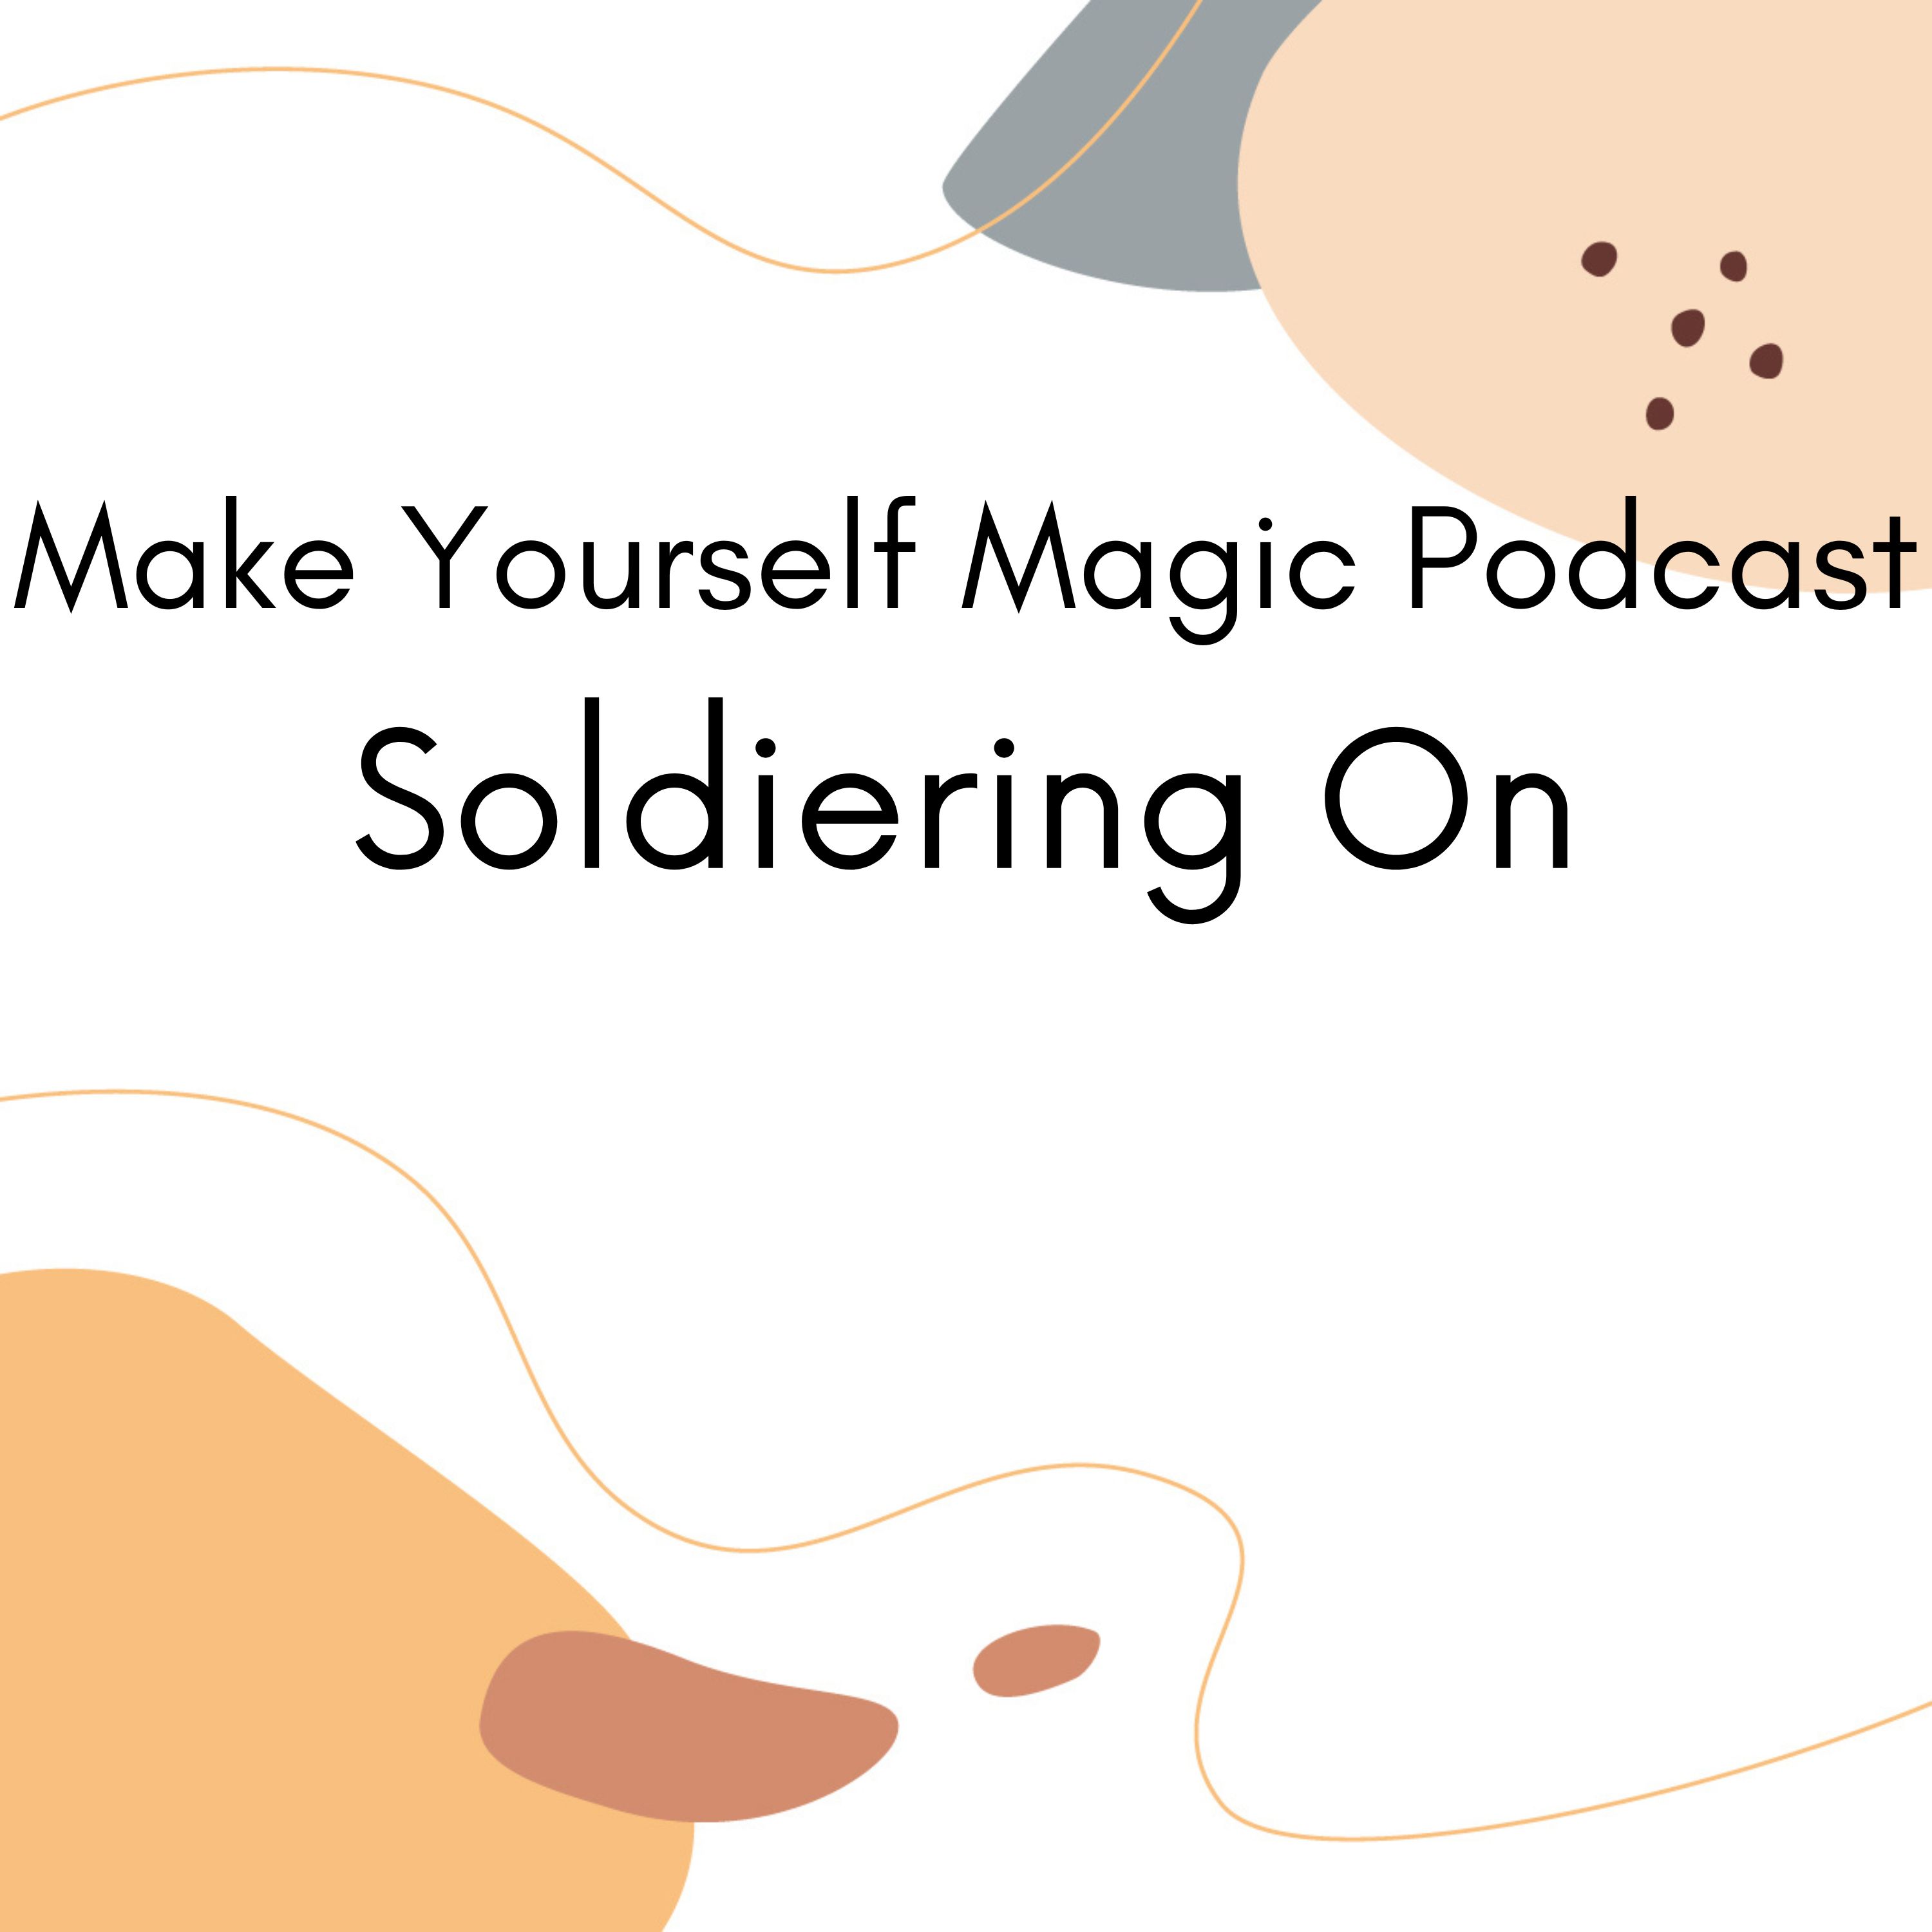 Make Yourself Magic Podcast: Soldiering On